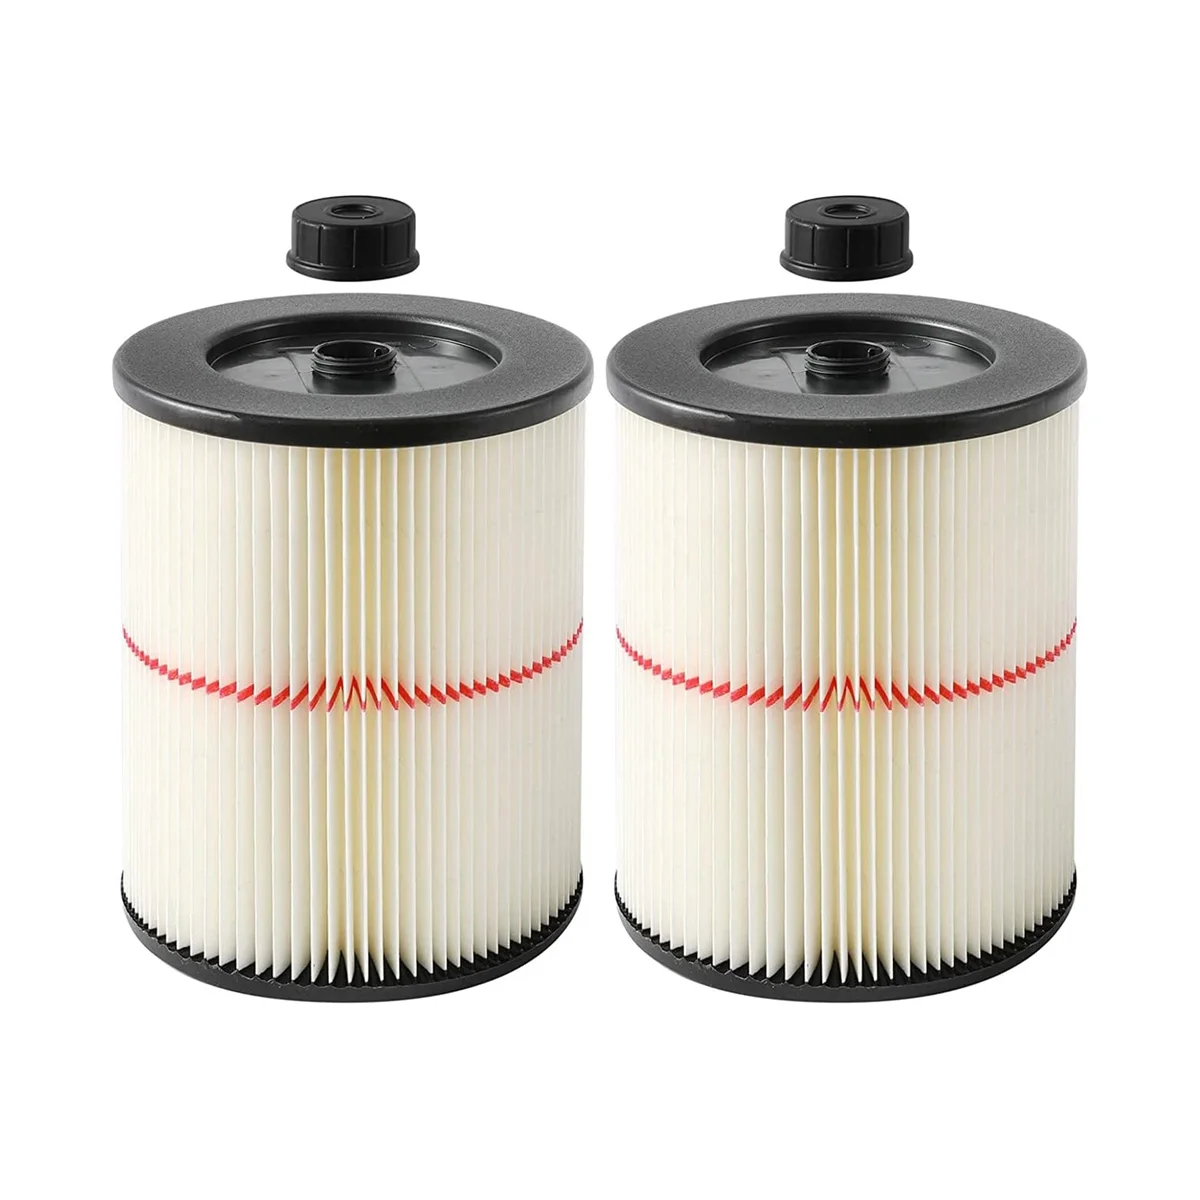 

Filter for Shop Vac Air Filter, Replacement for Craftsman Wet Dry Vac Filte 9-17816 Vacuum Filter 5 6 8 12 16 Gallon